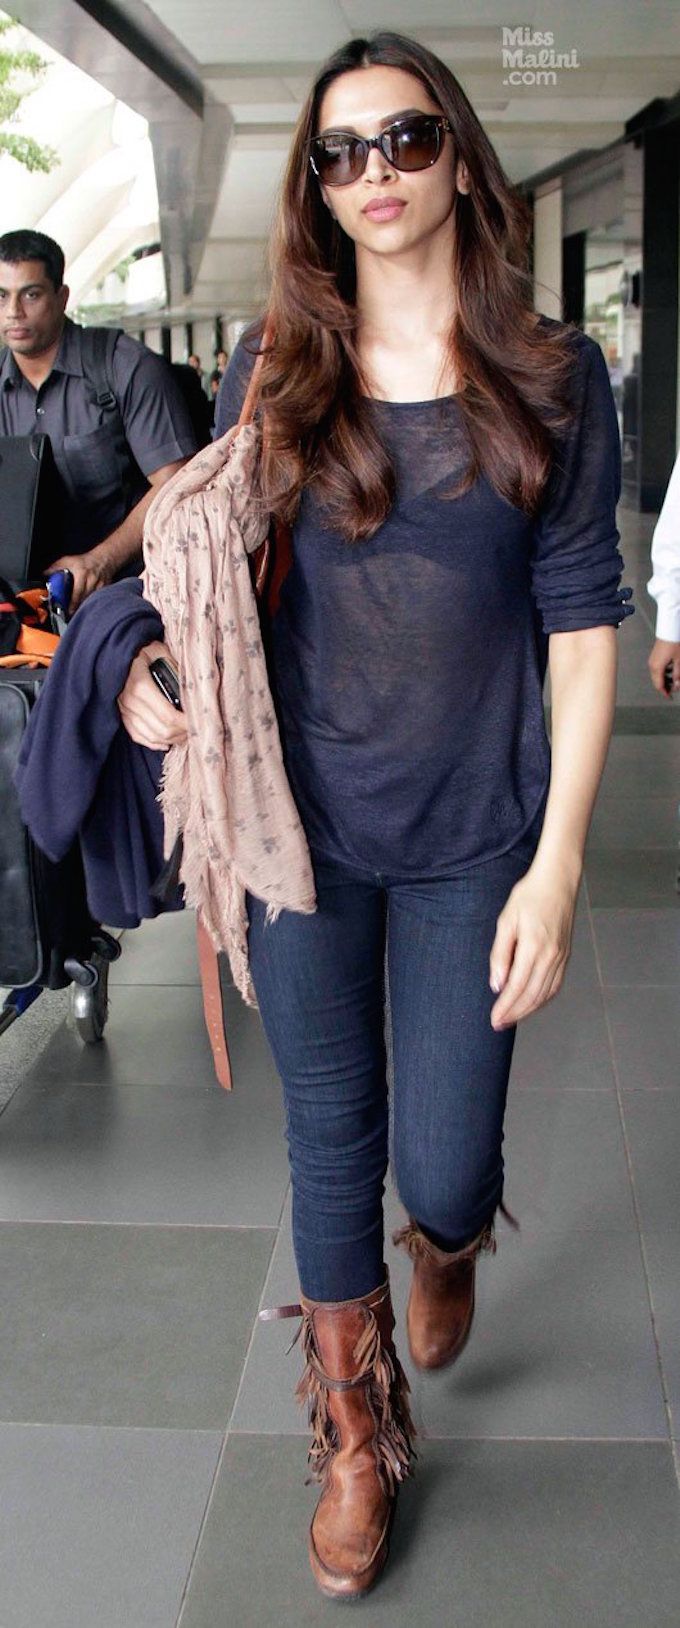 Deepika Padukone casual chic style at the airport